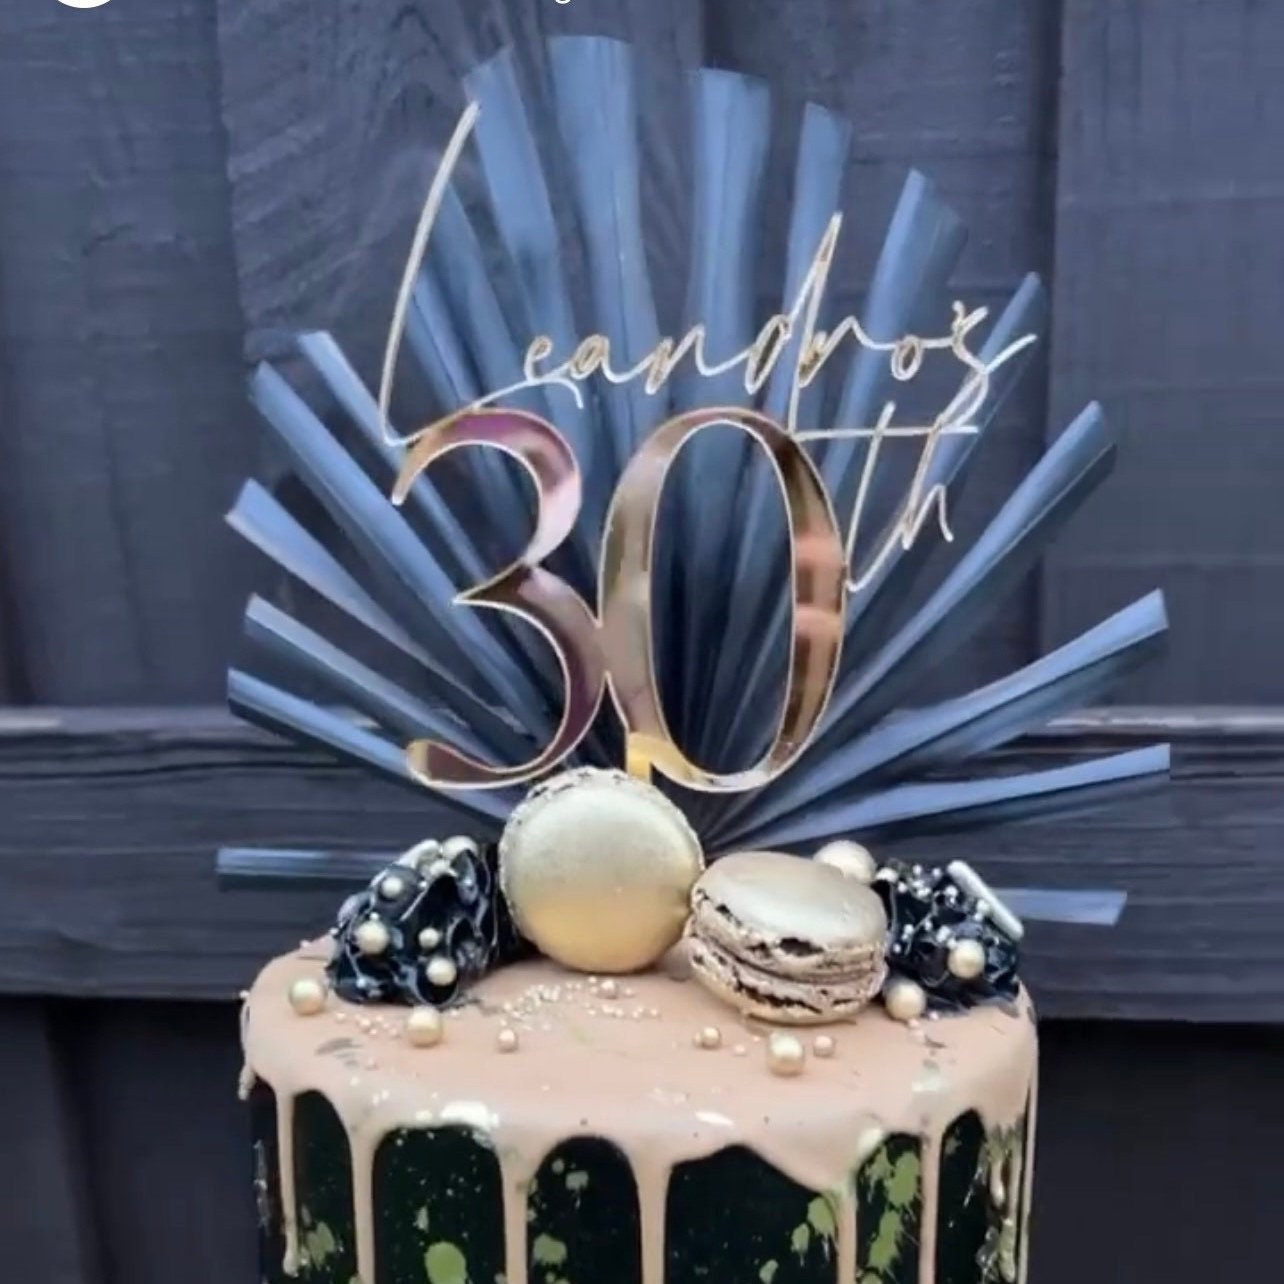 Designer inspired 21st Birthday cake, Designer inspired 21st Birthday cake  Happy Birthday Rhys 🎂🥳 Who don't like a bit of Gucci & Versace all edible  decorations #21stbirthday #cake